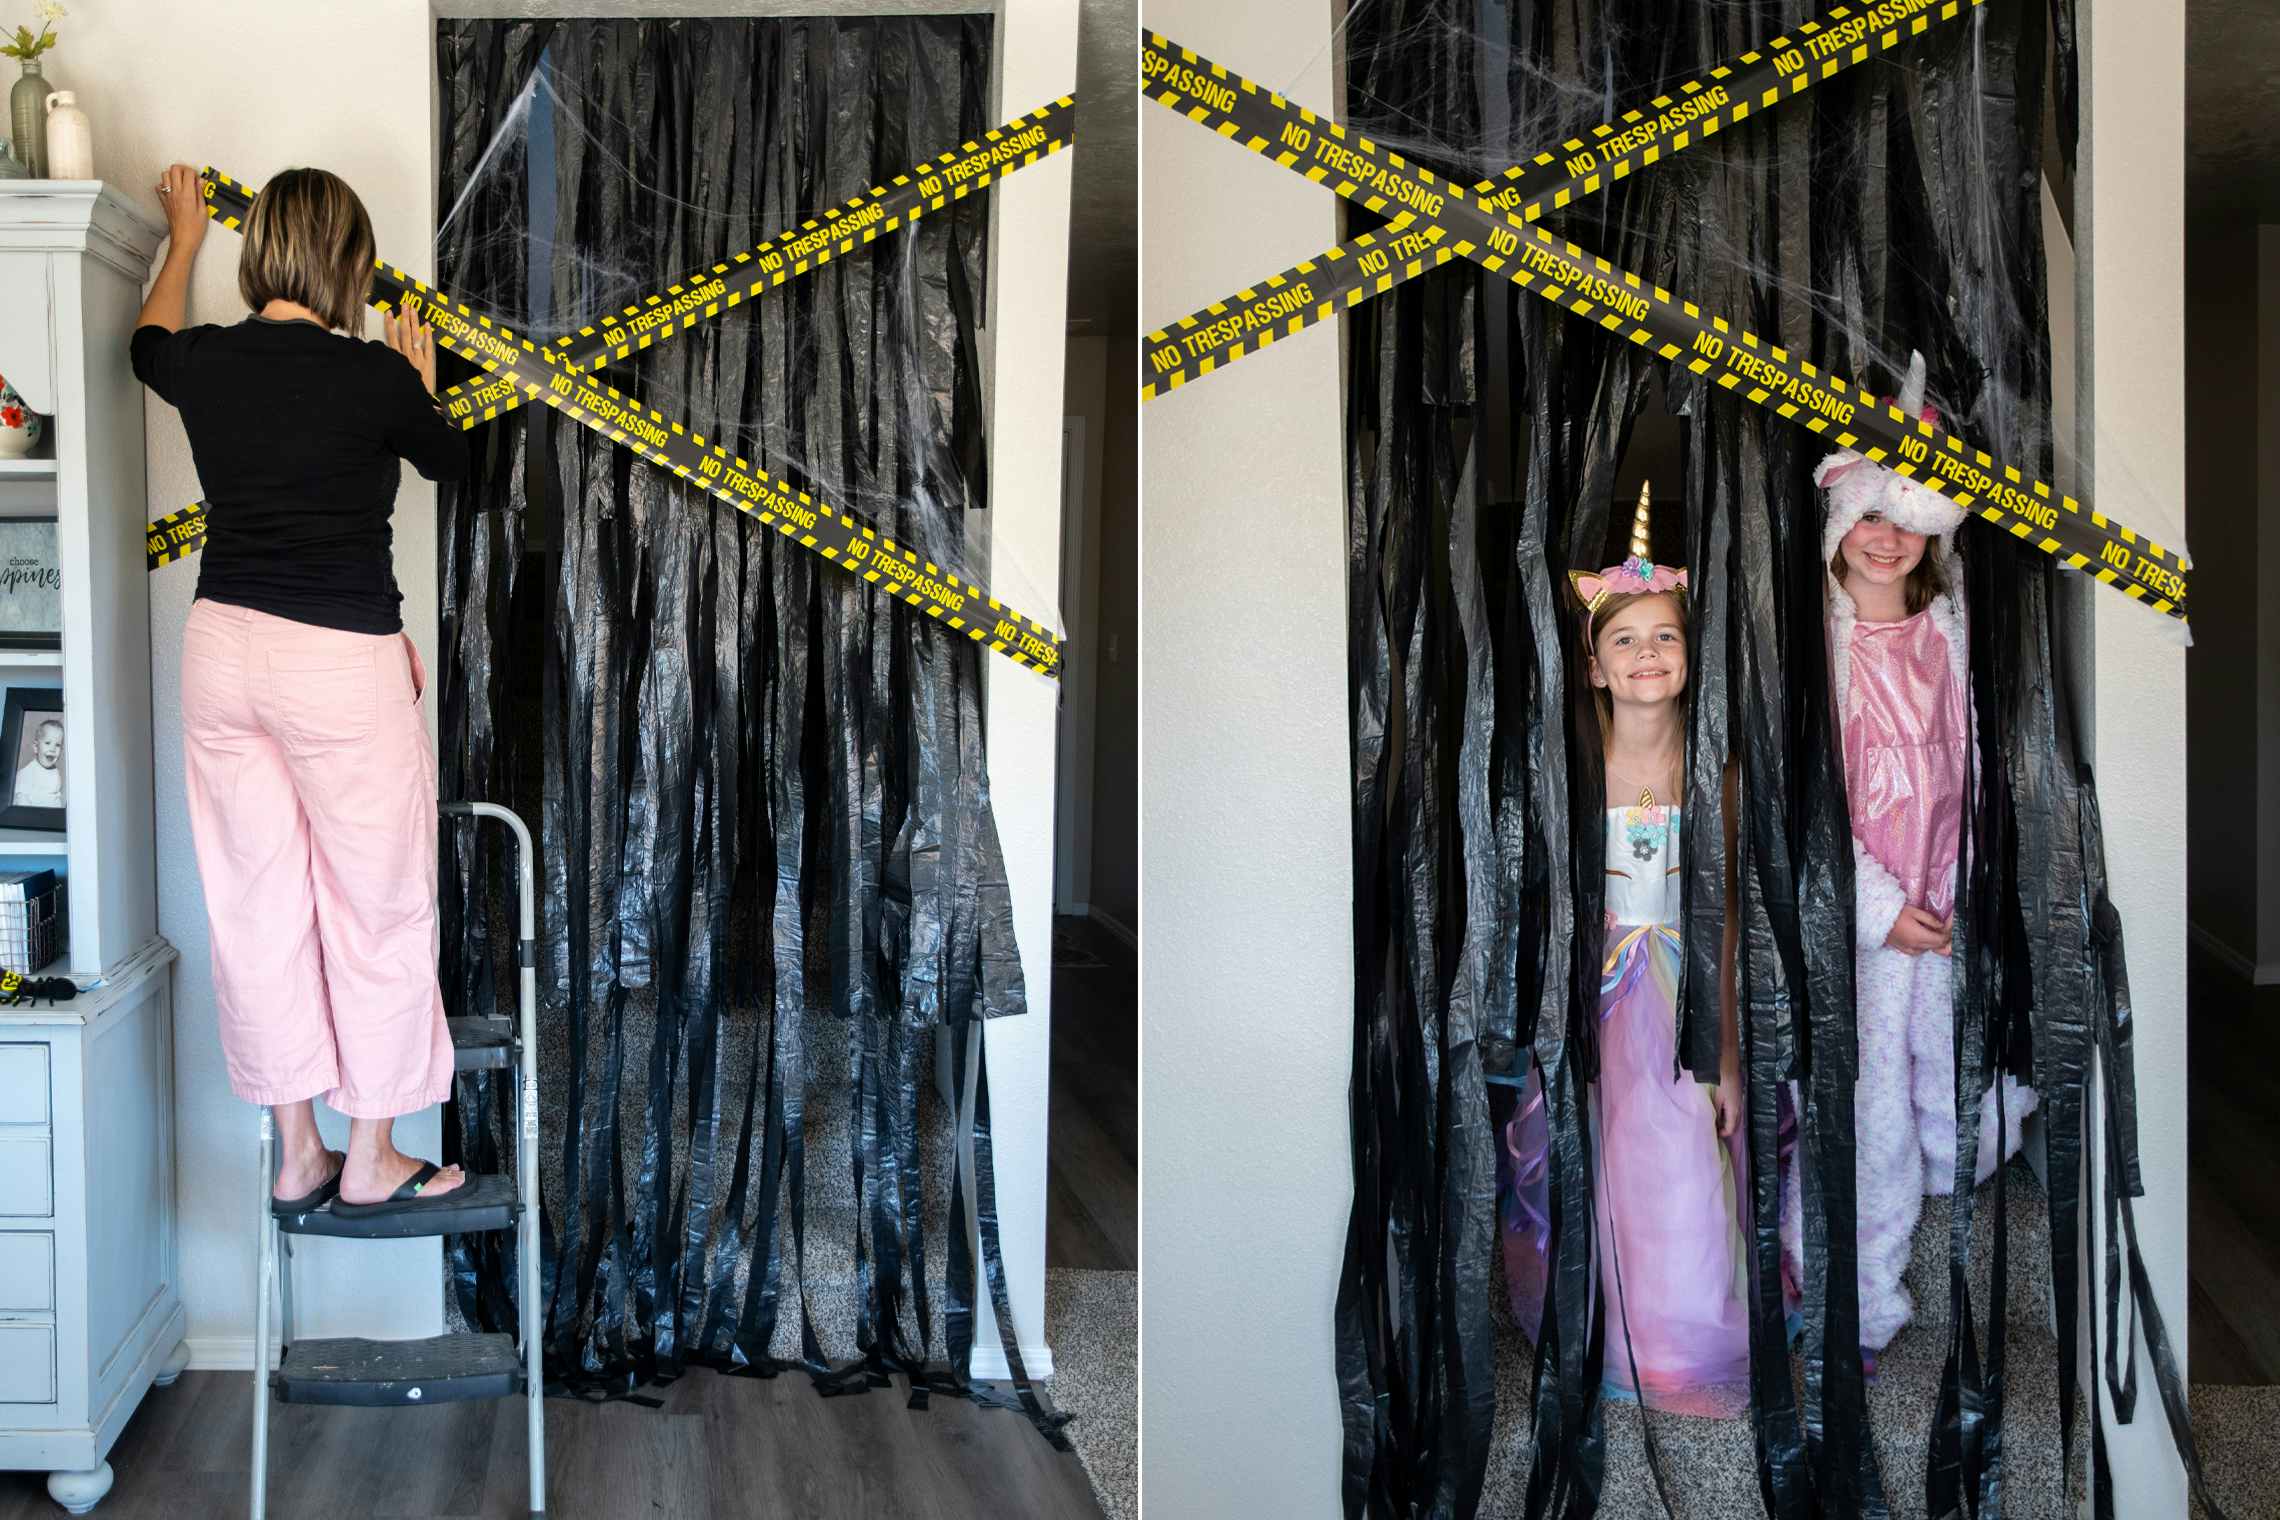 A woman using caution tape, fake spider webs, and cut black garbage bags to create an enterance to an at home haunted house. And a little girl poking their heads through the black garbage bag curtains.